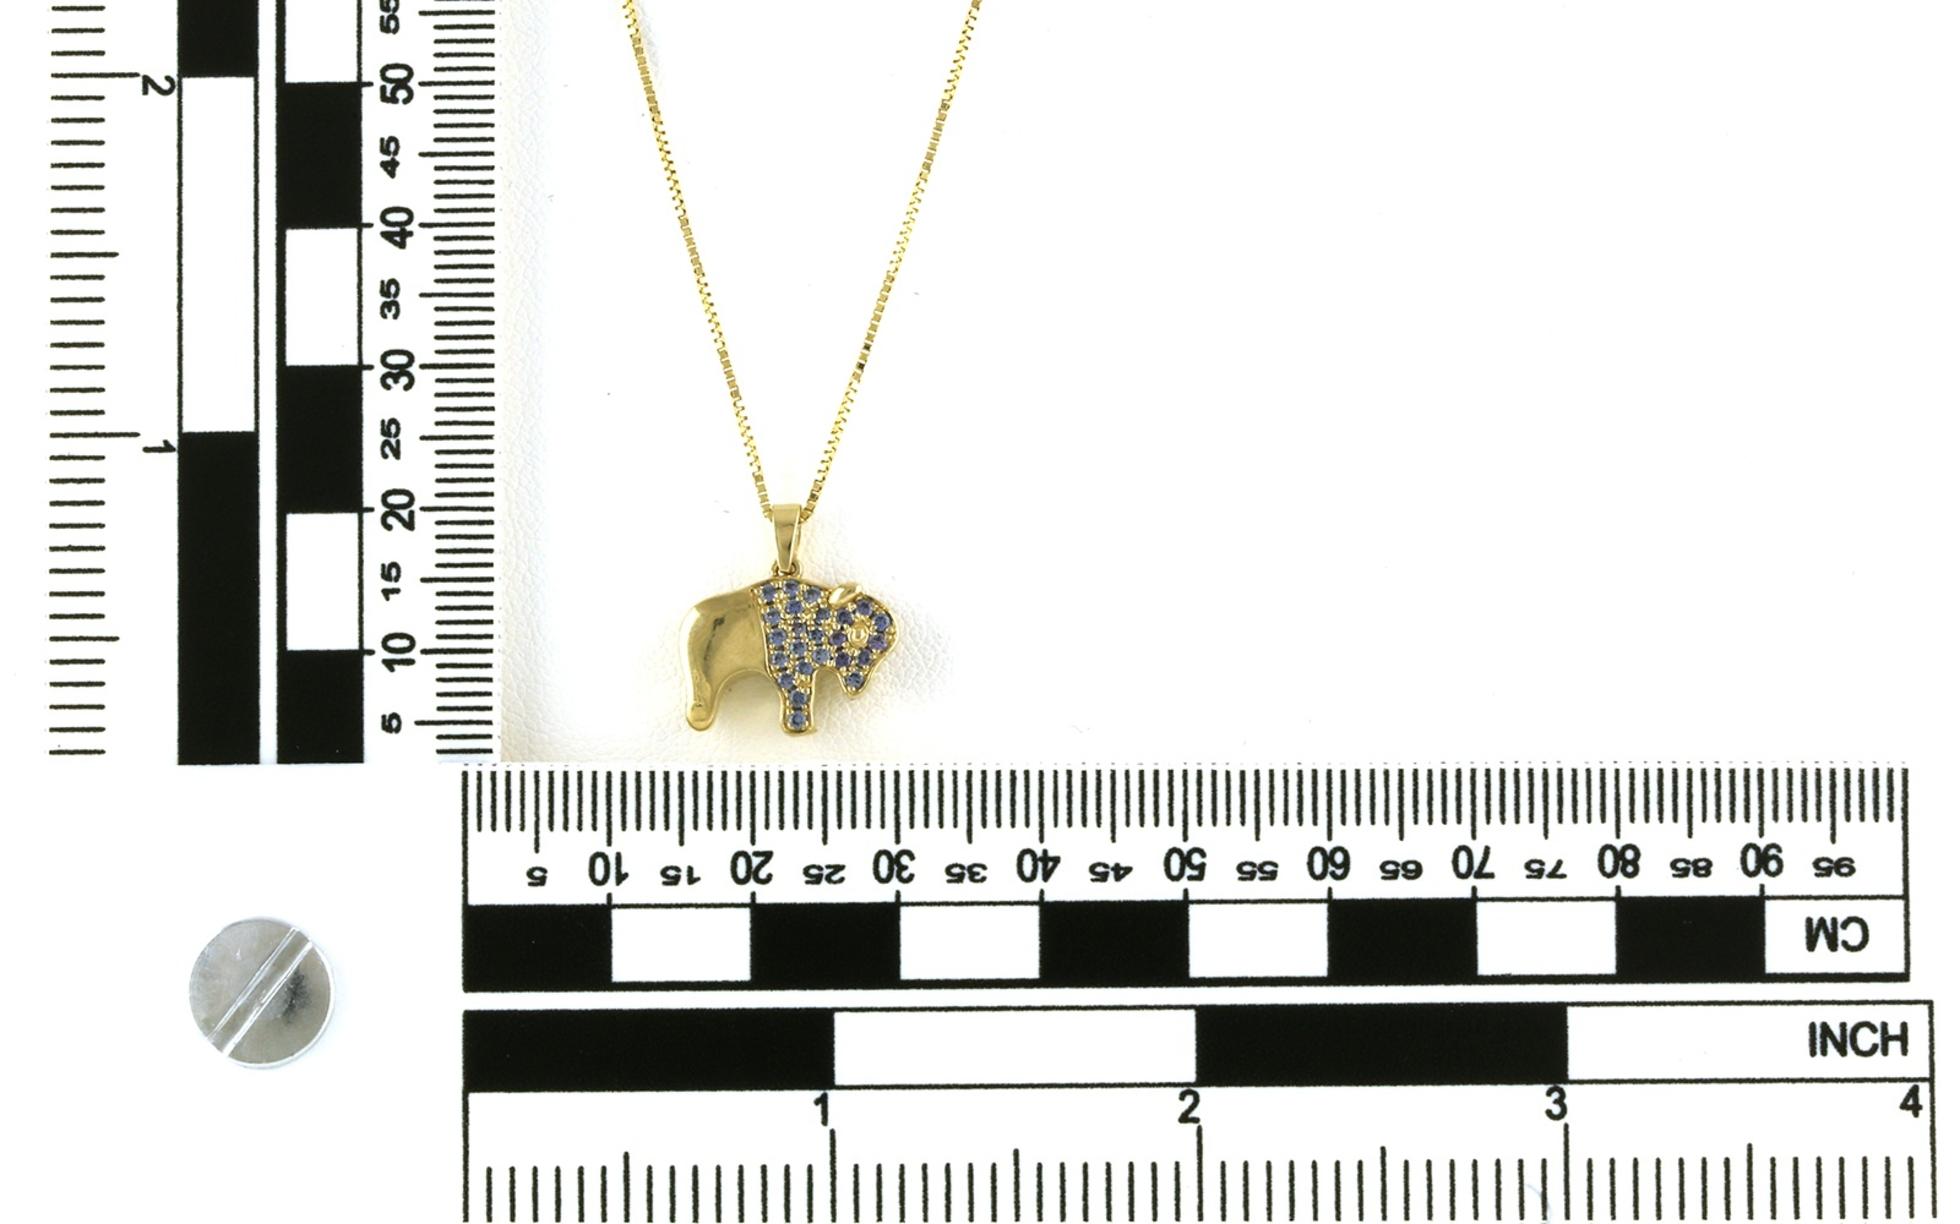 Buffalo Pave Montana Yogo Sapphire Necklace in Yellow Gold (0.38cts TWT) scale